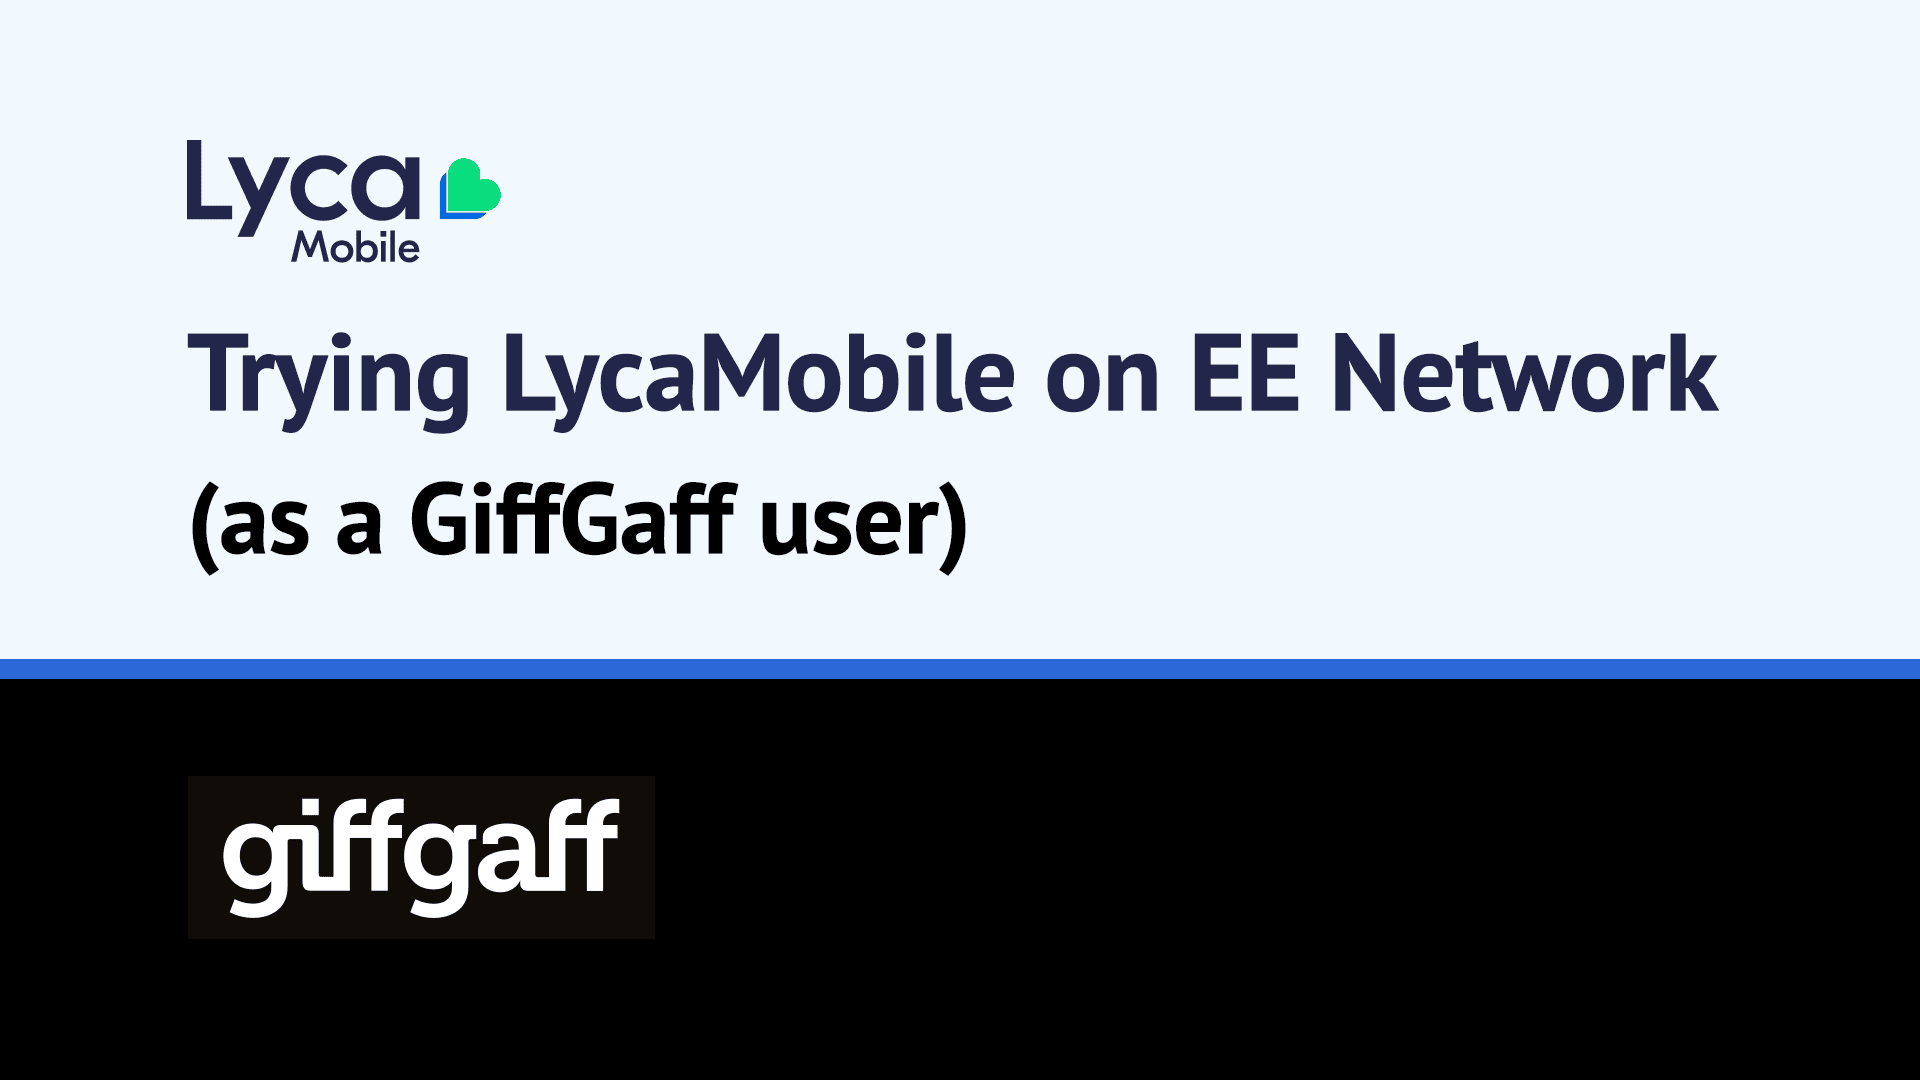 Trying LycaMobile on EE Network (as a GiffGaff user)